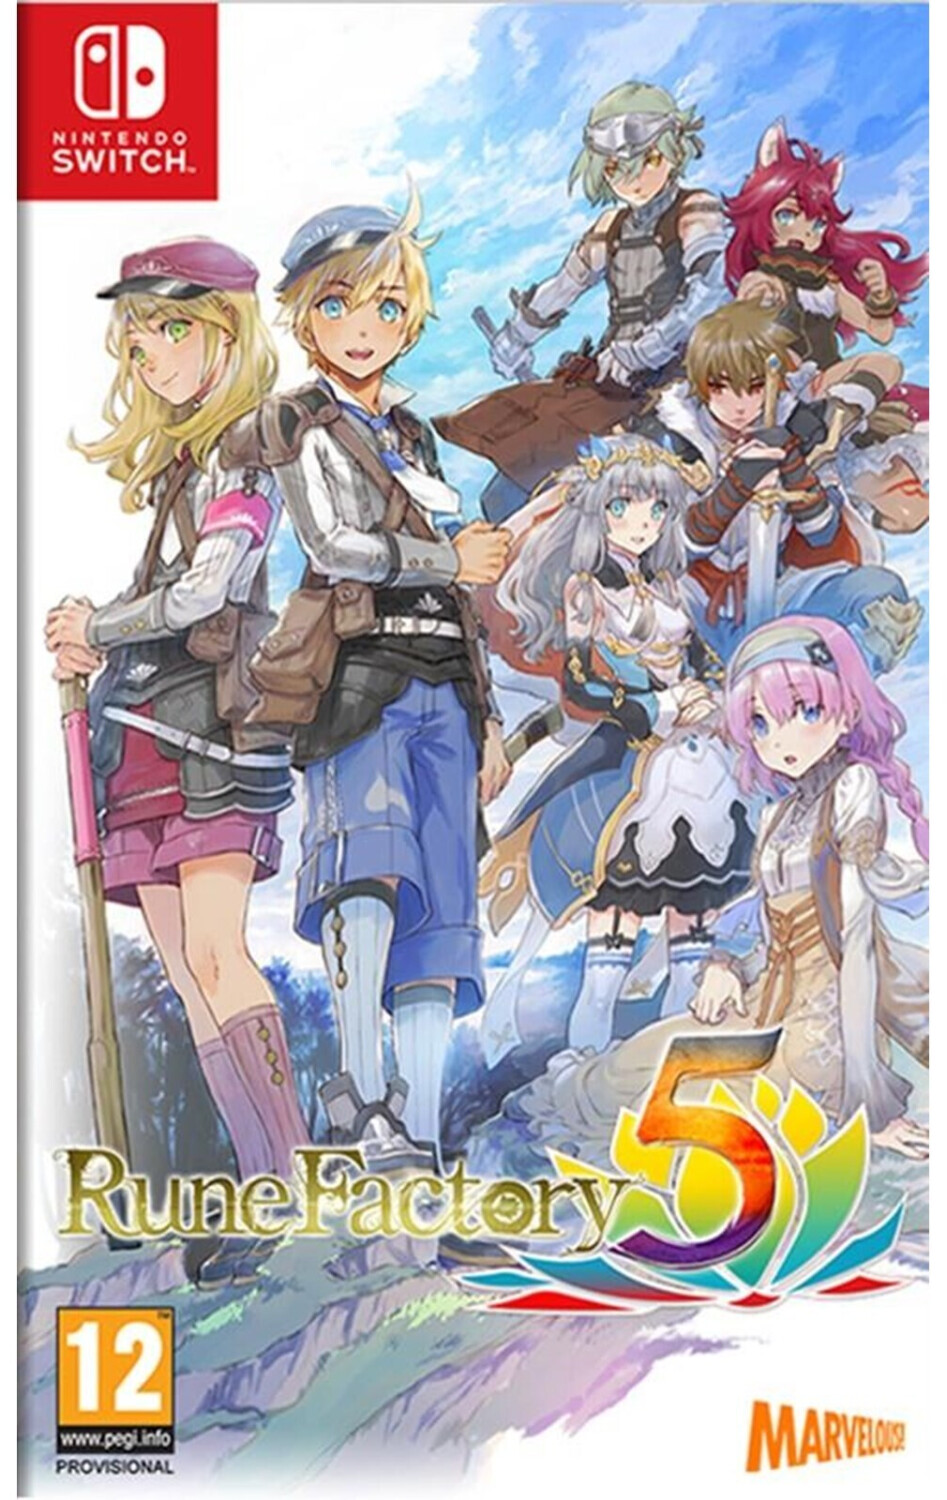 Photos - Game Marvelous Rune Factory 5 (Switch)